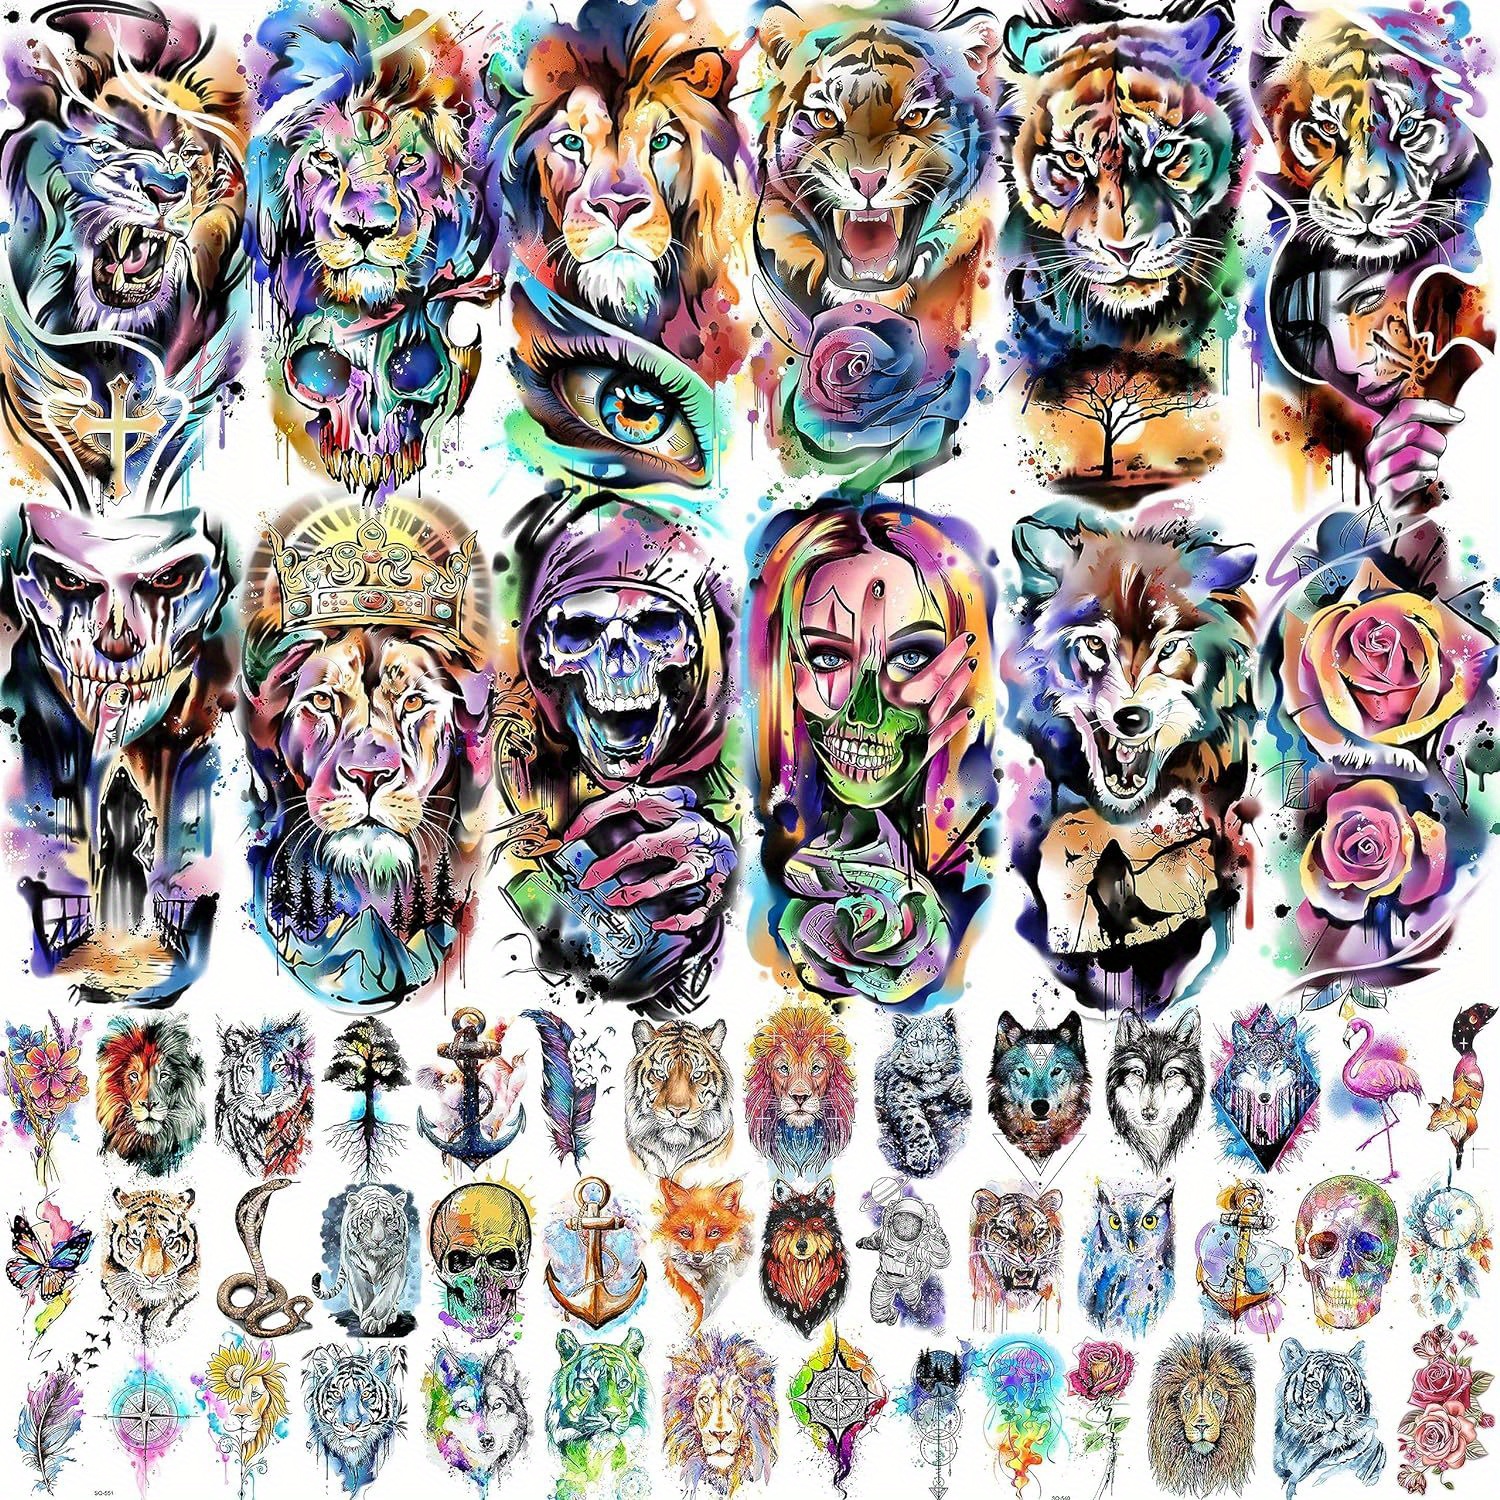 

54 Sheets 3d Watercolor Temporary Tattoos For Women Men Adults Arm, Tiger Lion Skeleton Fake Tattoos That Look Real And Last Long, Long Lasting Colorful Halloween Wolf Rose Flower Temp Tattoo Stickers